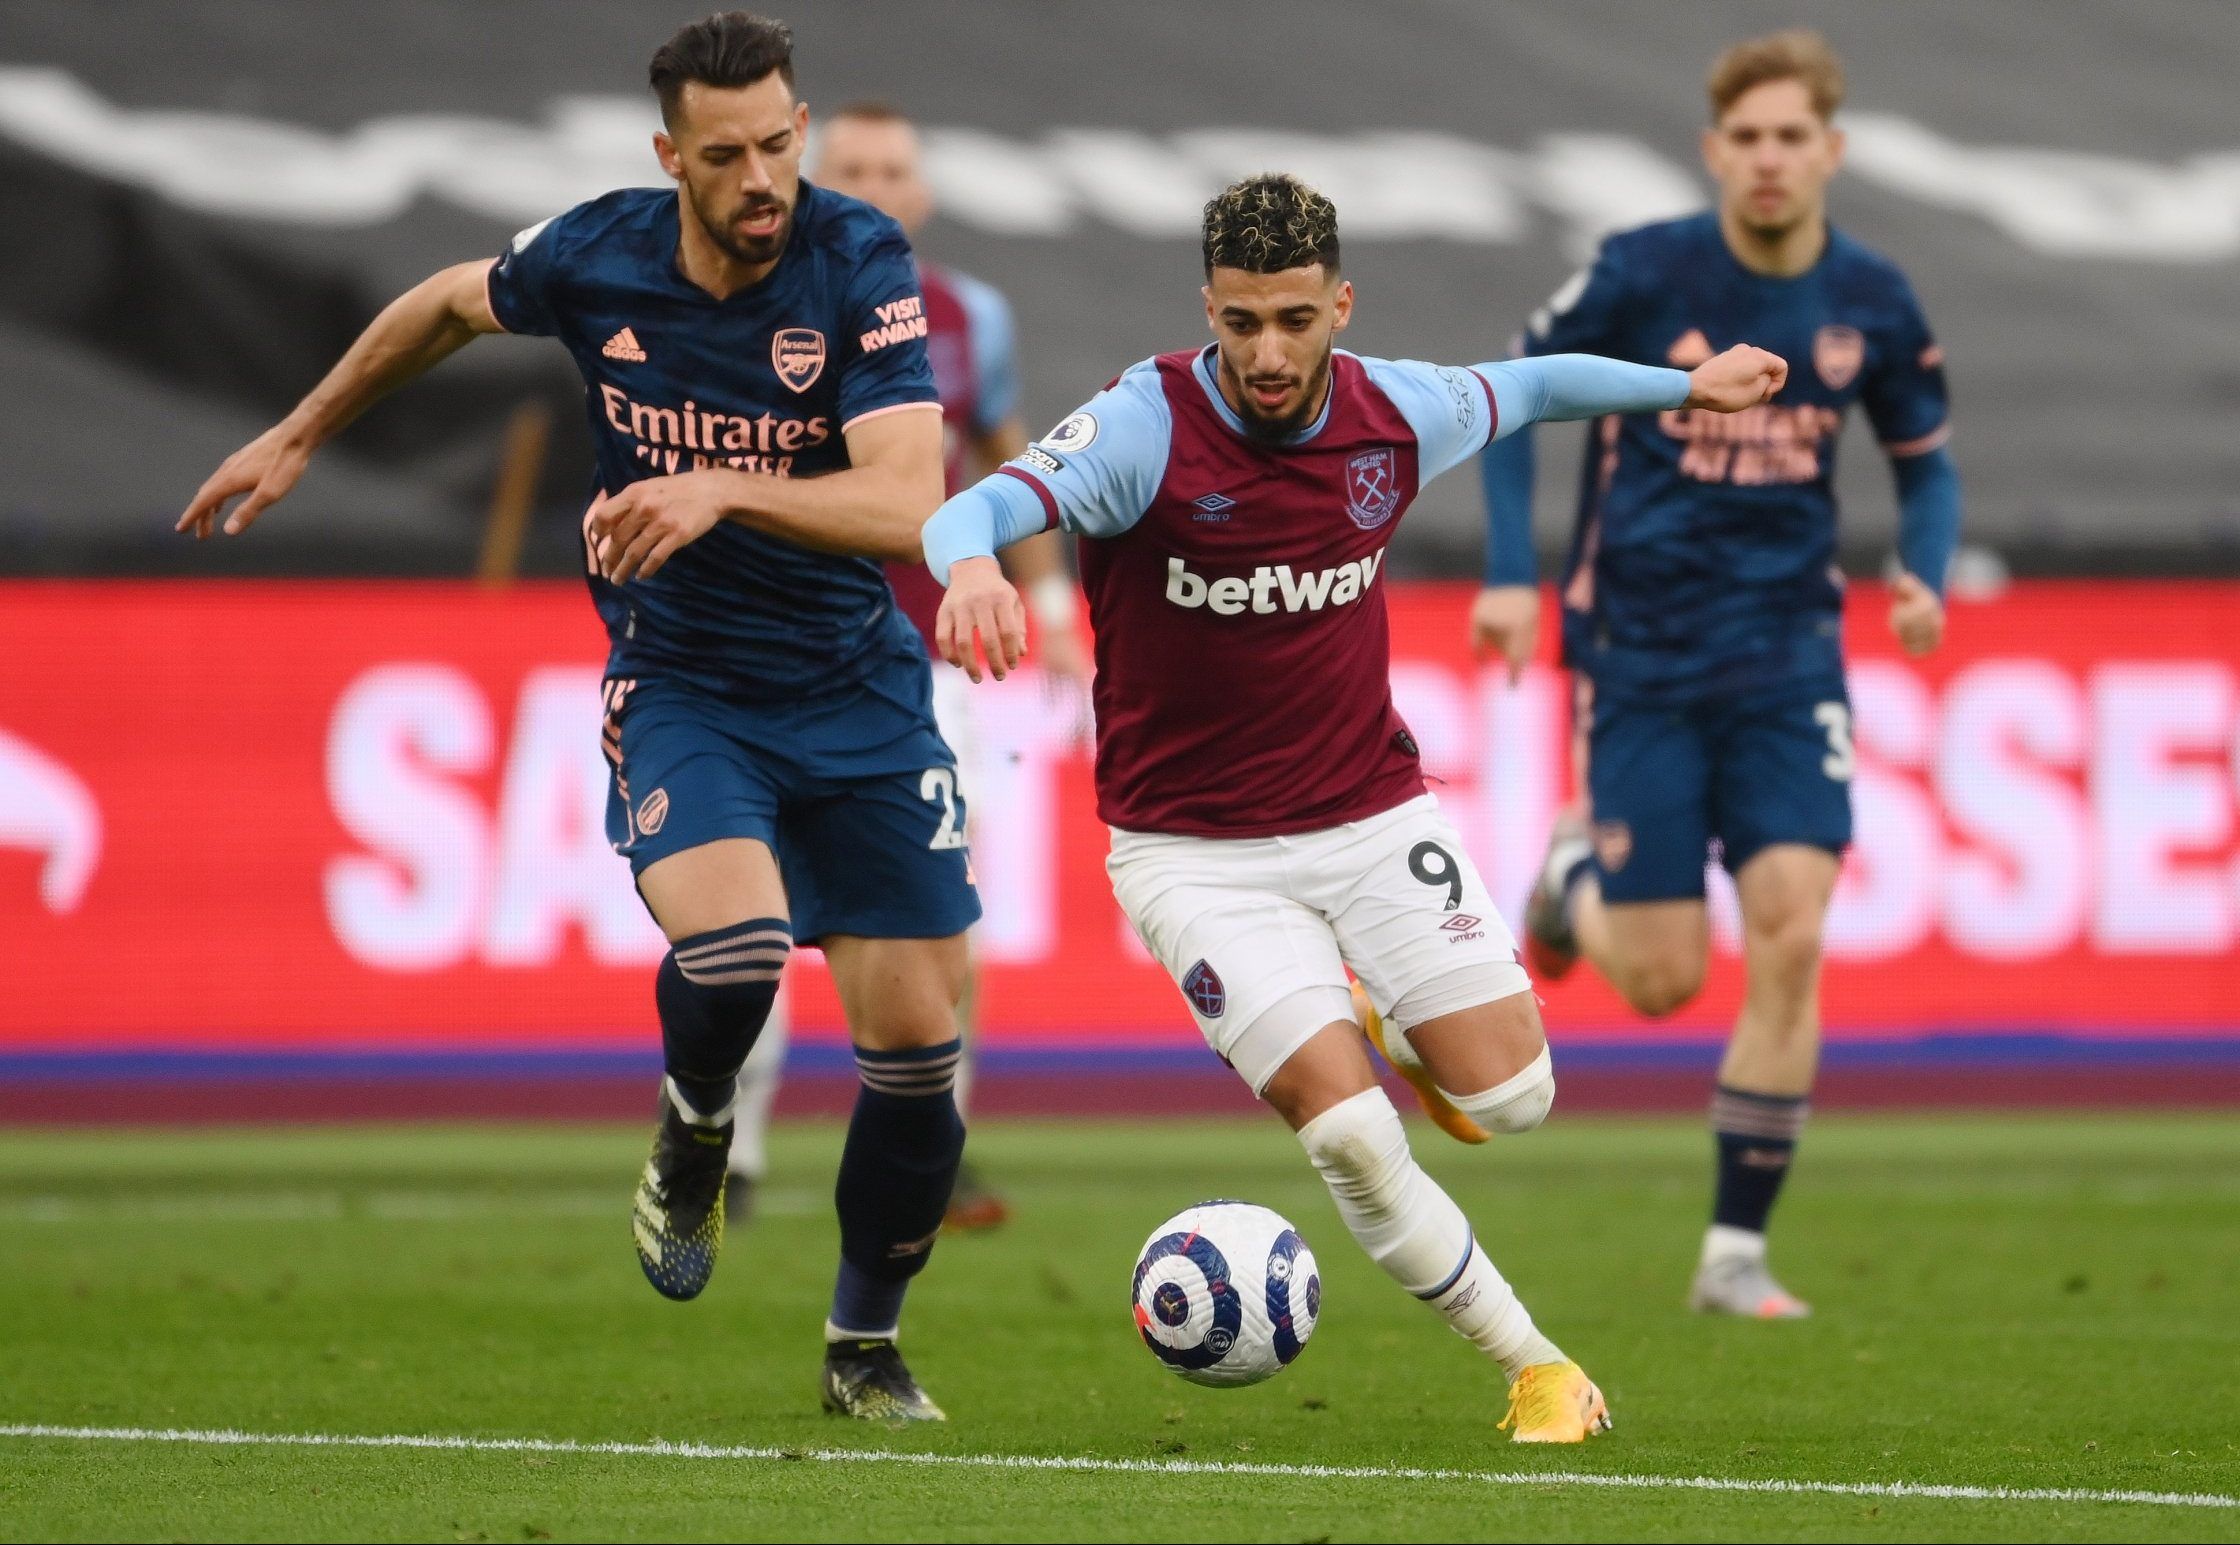 west ham united winger said benrahma in action against arsenal in the premier league